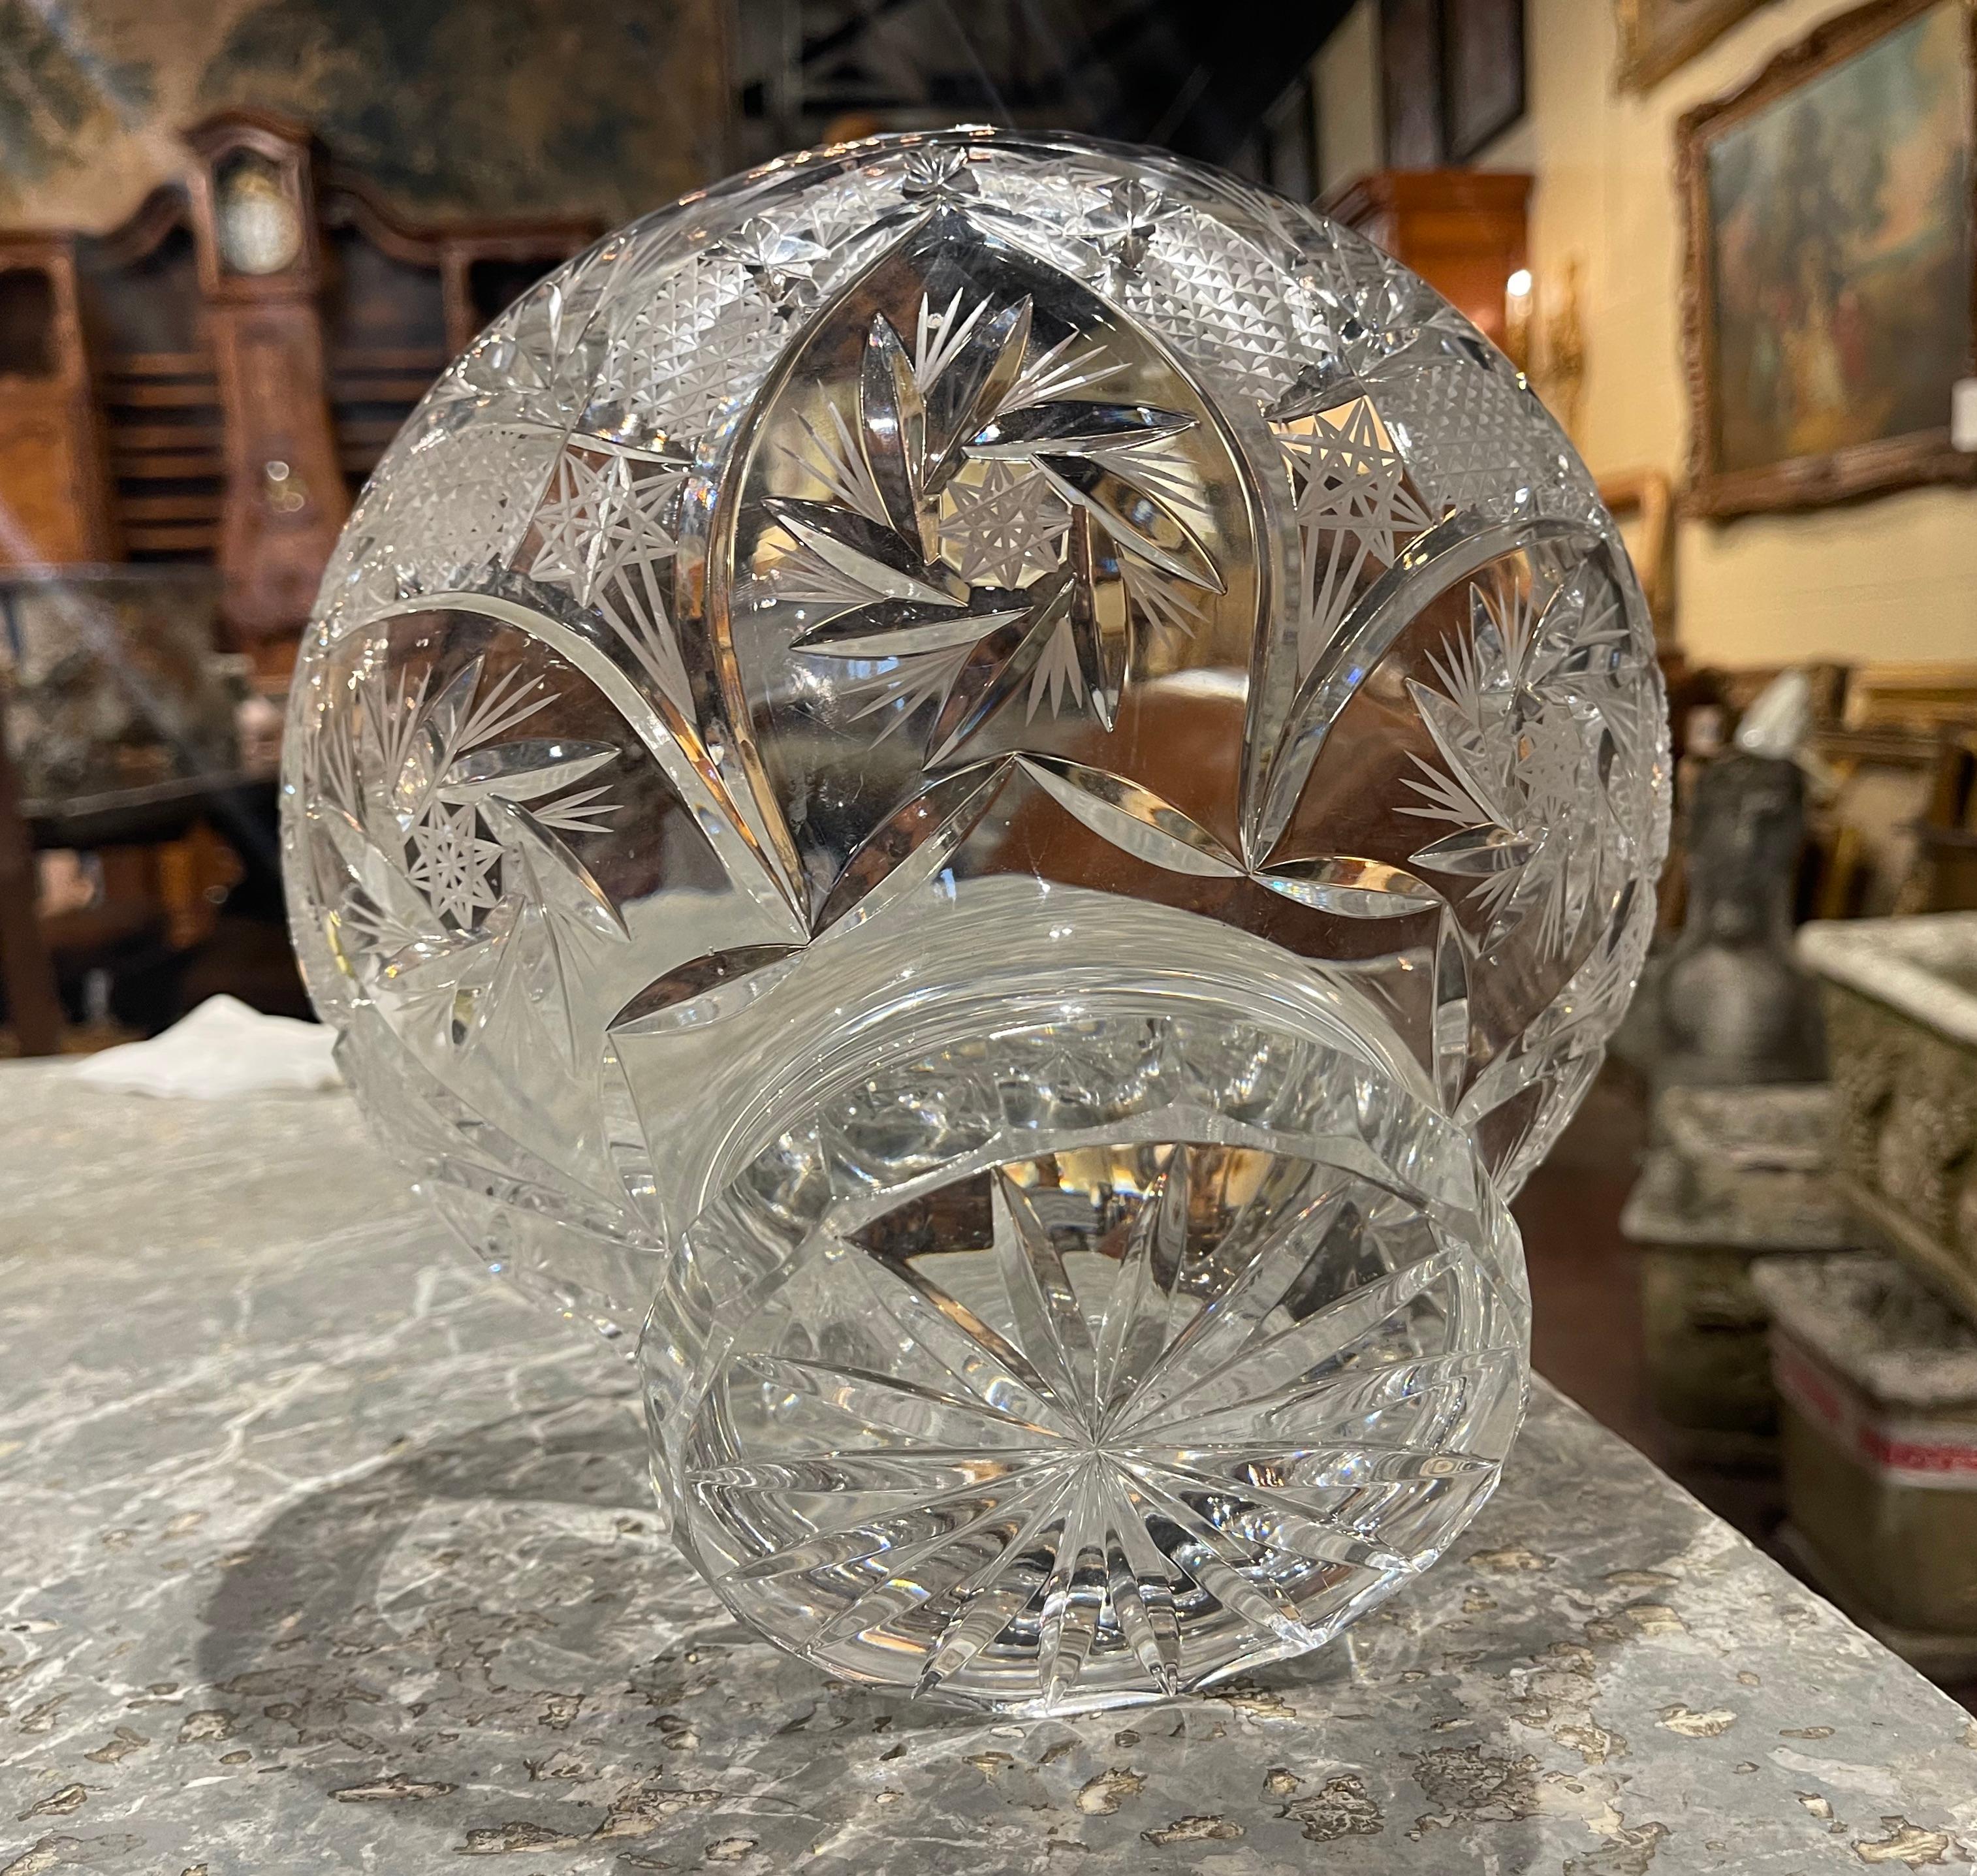 Midcentury French Cut Glass Crystal Decorative Compote Centerpiece Bowl In Excellent Condition For Sale In Dallas, TX